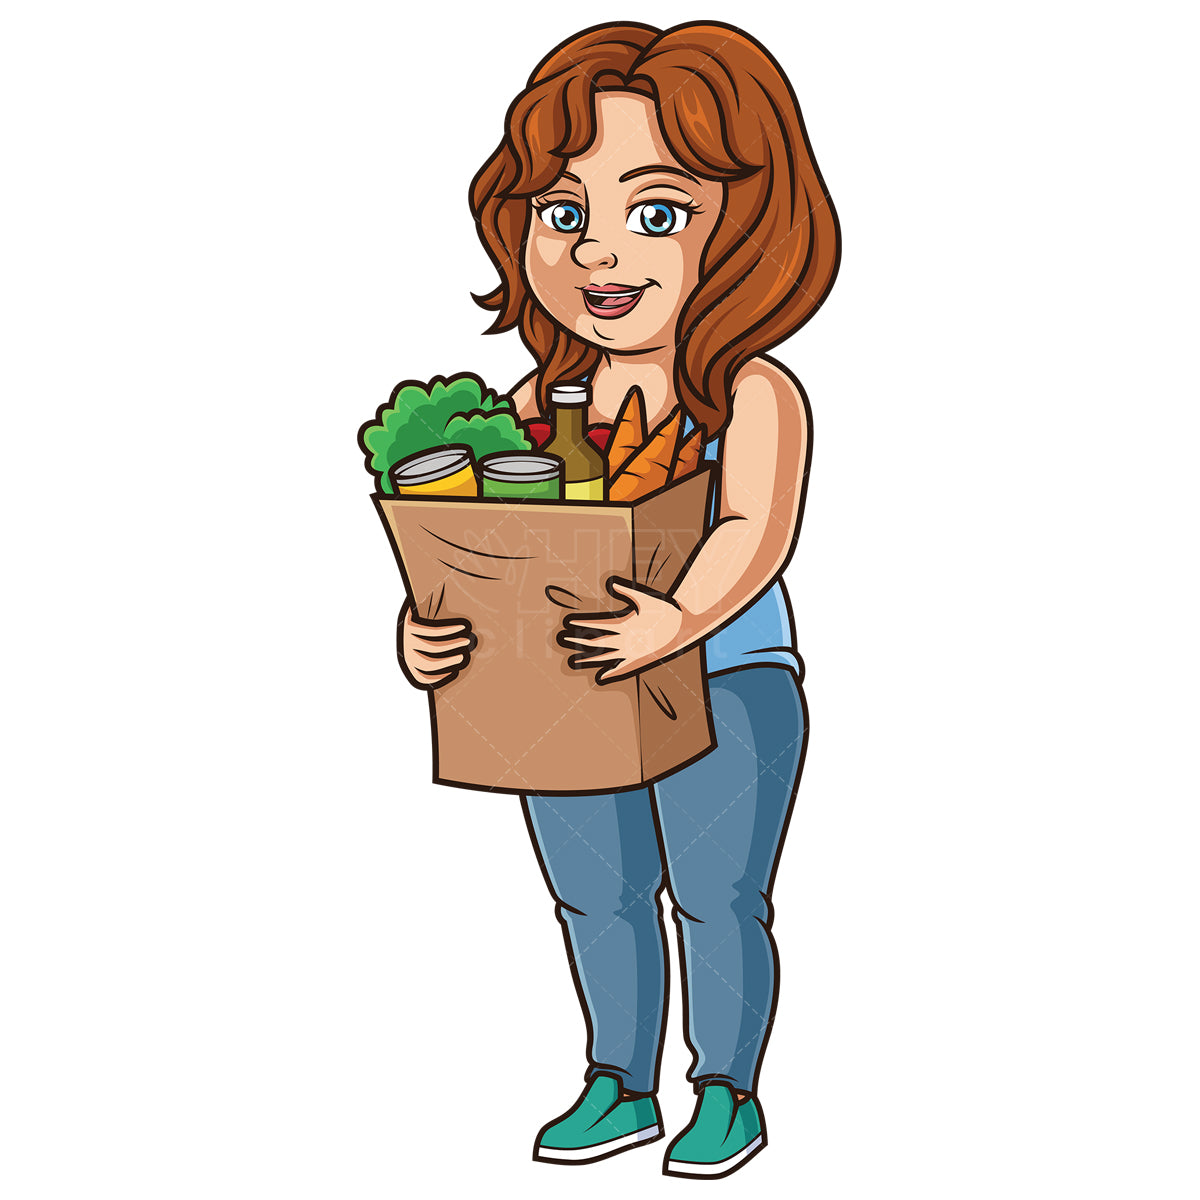 Royalty-free stock vector illustration of a chubby girl holding groceries.